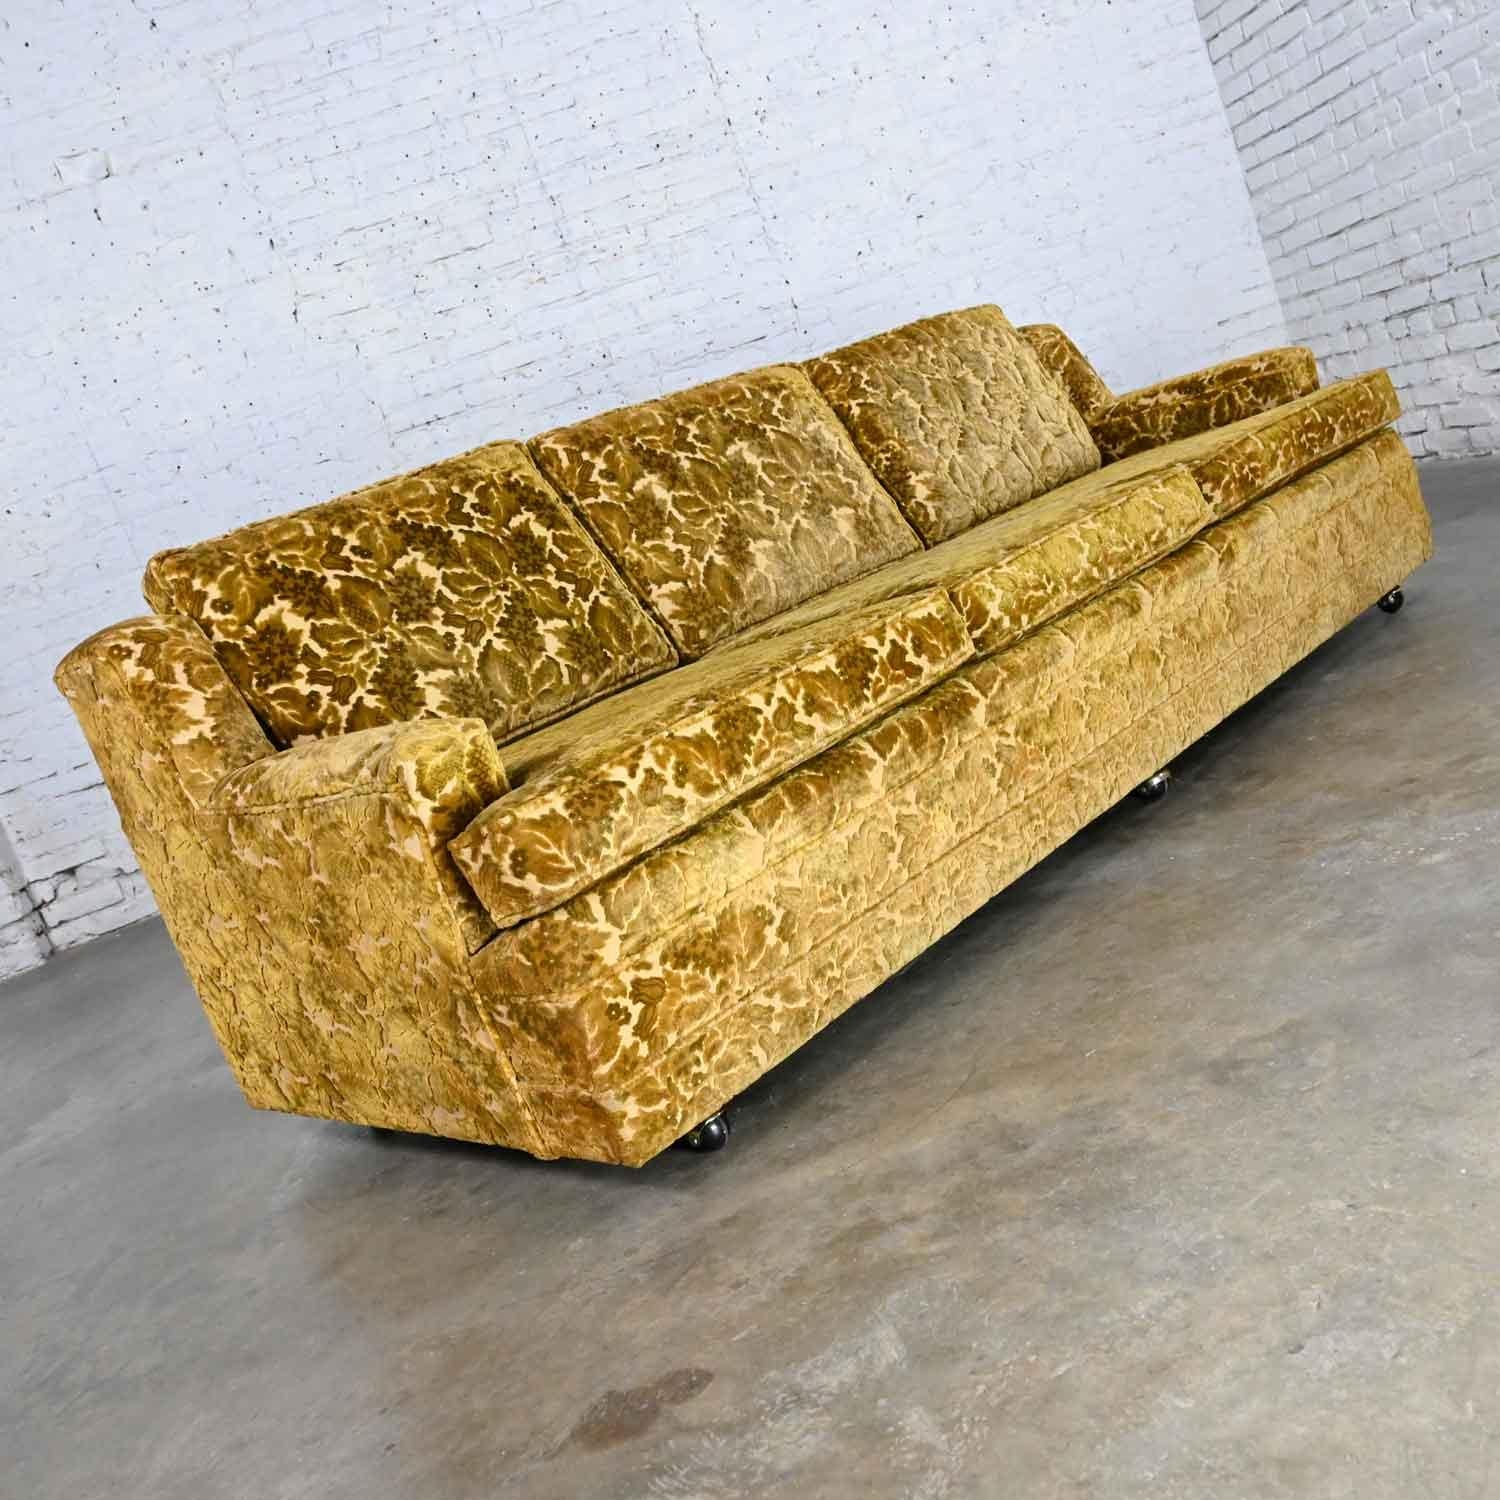 Gorgeous vintage Hollywood Regency style greenish-gold colored floral cut velvet modified Lawson style sofa with loose seat and back cushions, three casters in front, and two round tapered wood legs in the back. Beautiful condition, keeping in mind